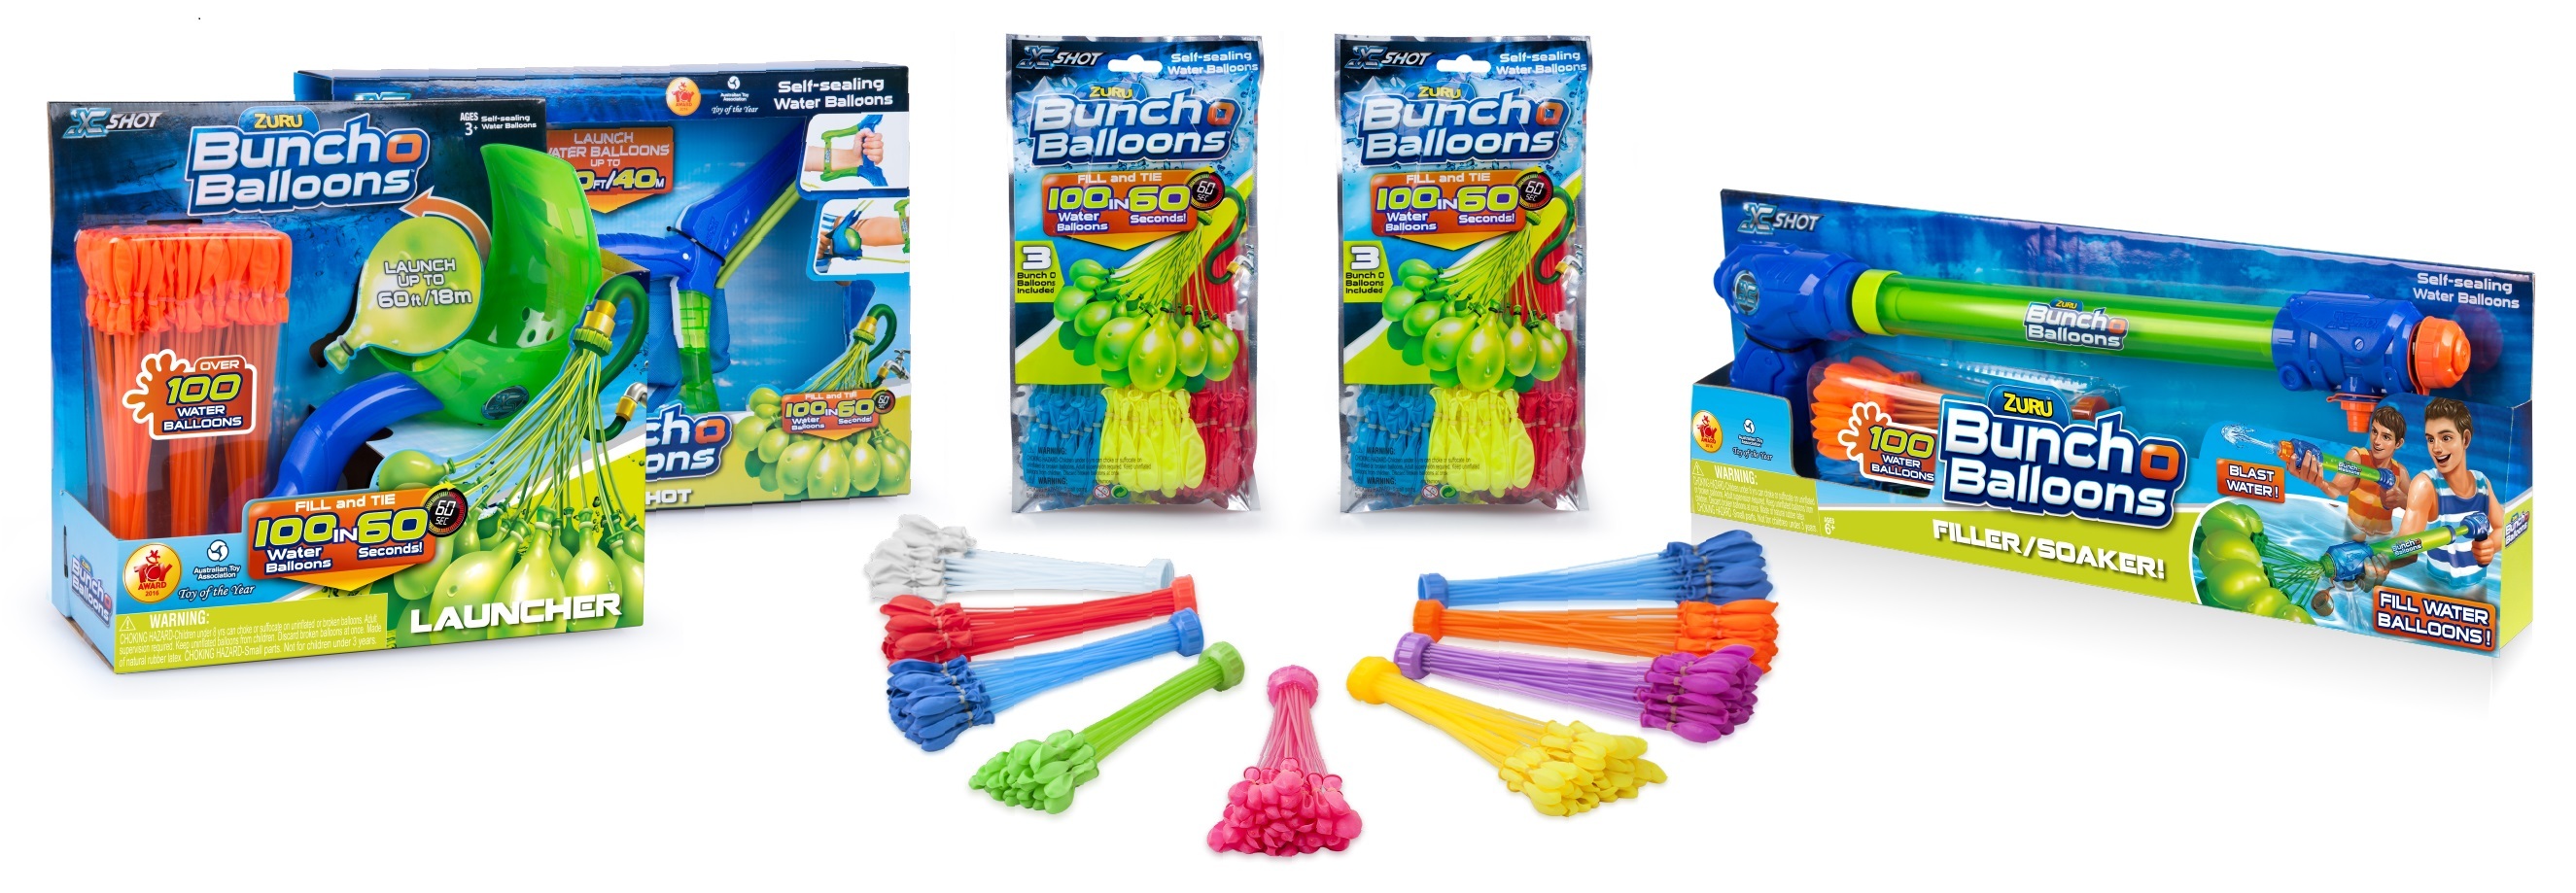 ZURU Files Third Lawsuit against Telebrands for Bunch O Balloons ...